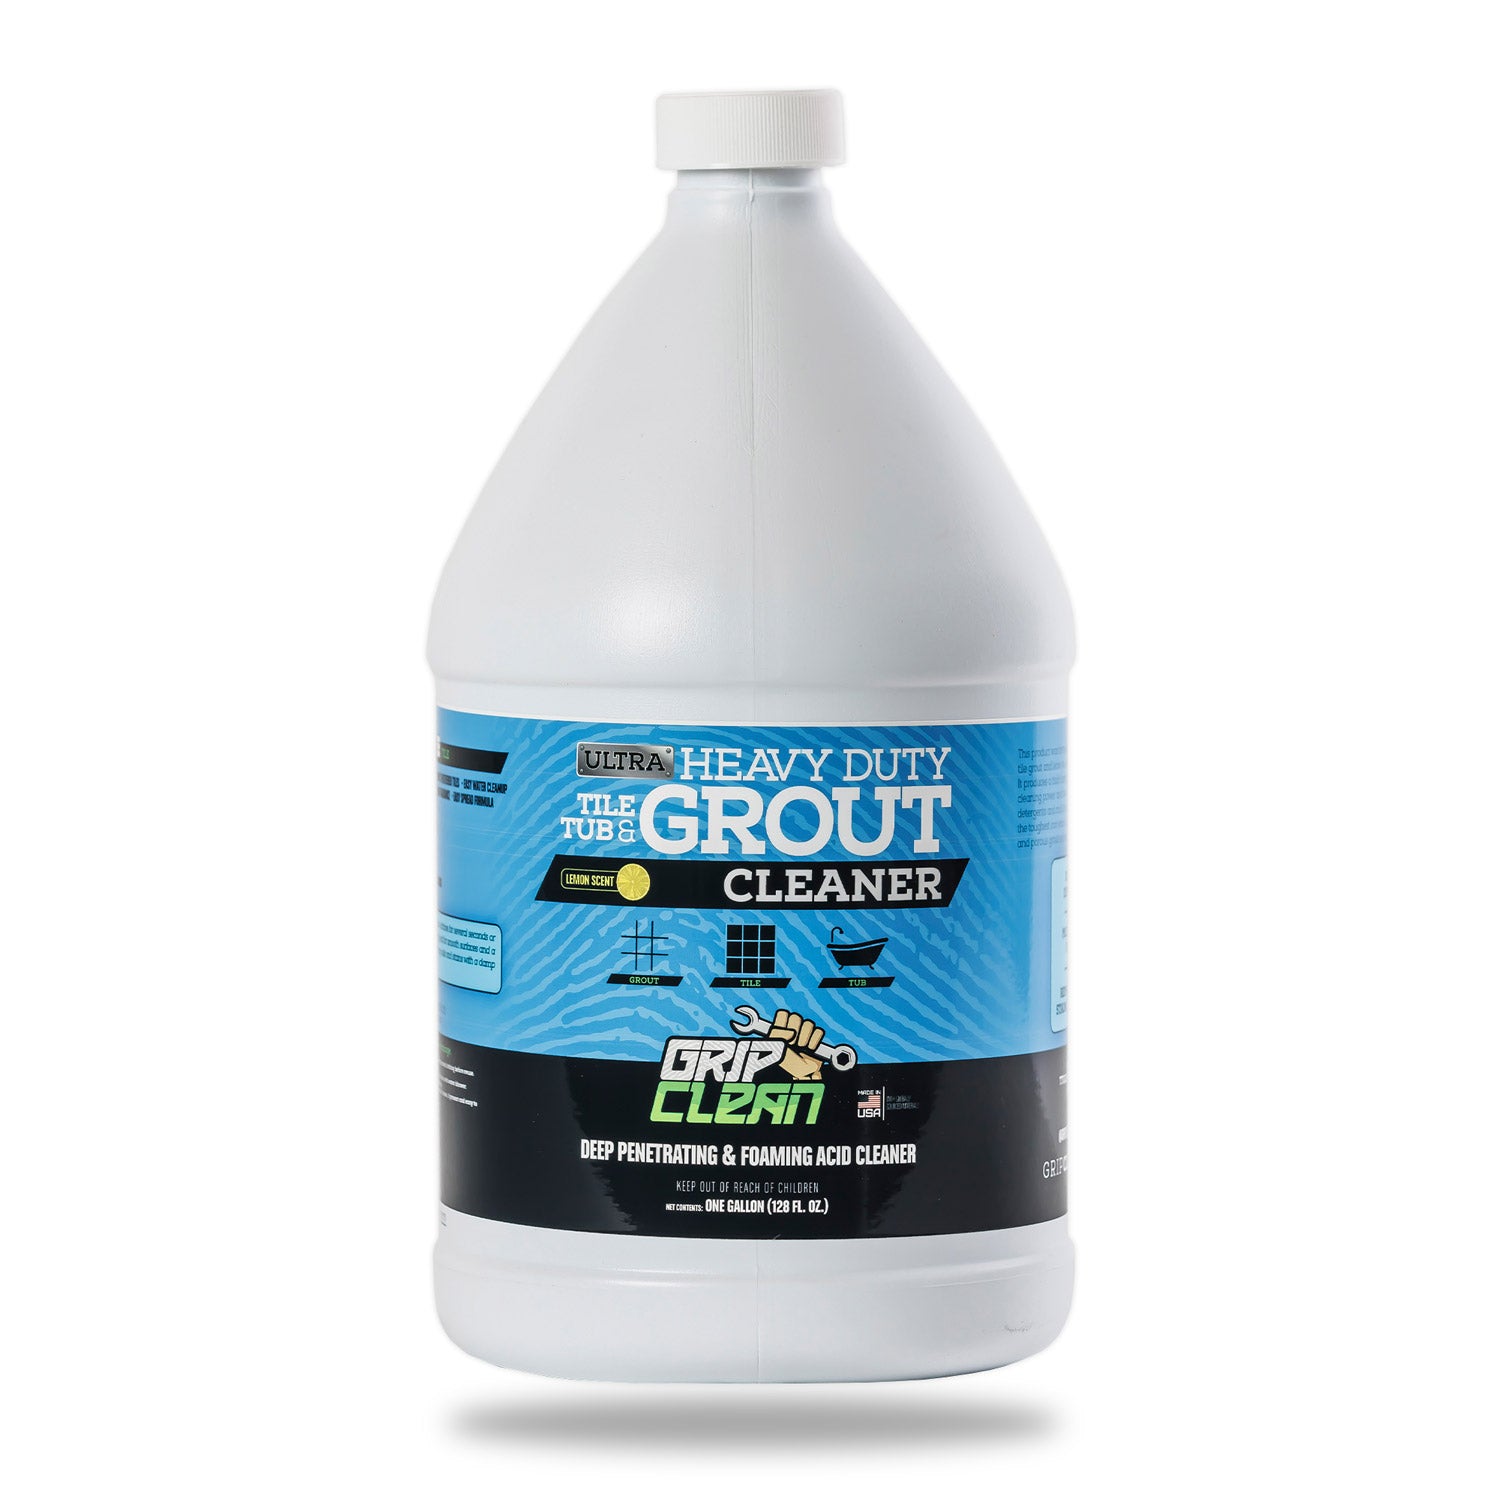 Tile, Tub, & Grout Cleaner